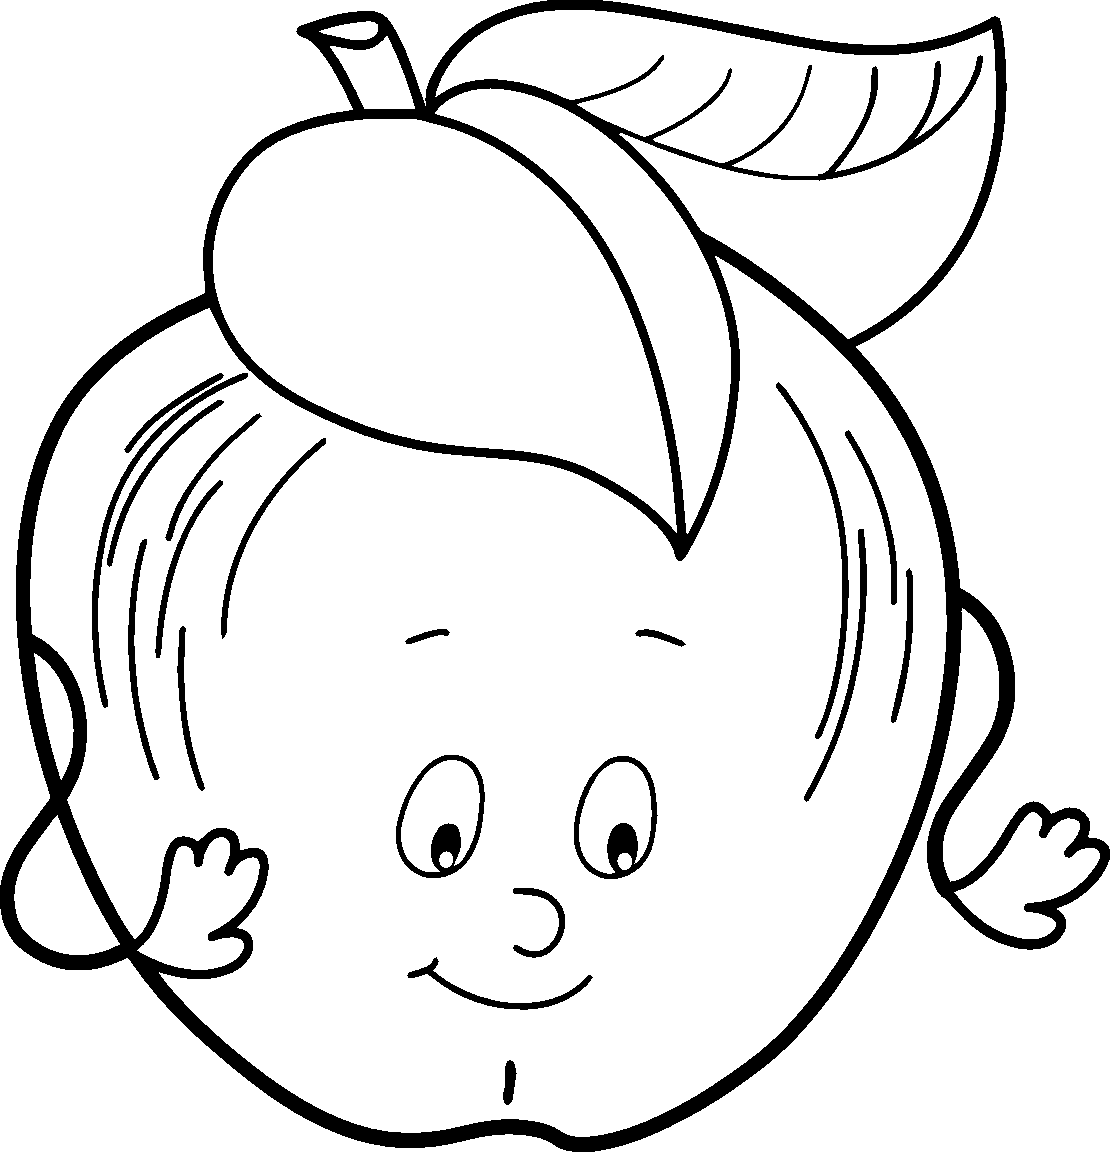 Fruit and vegetable coloring pages